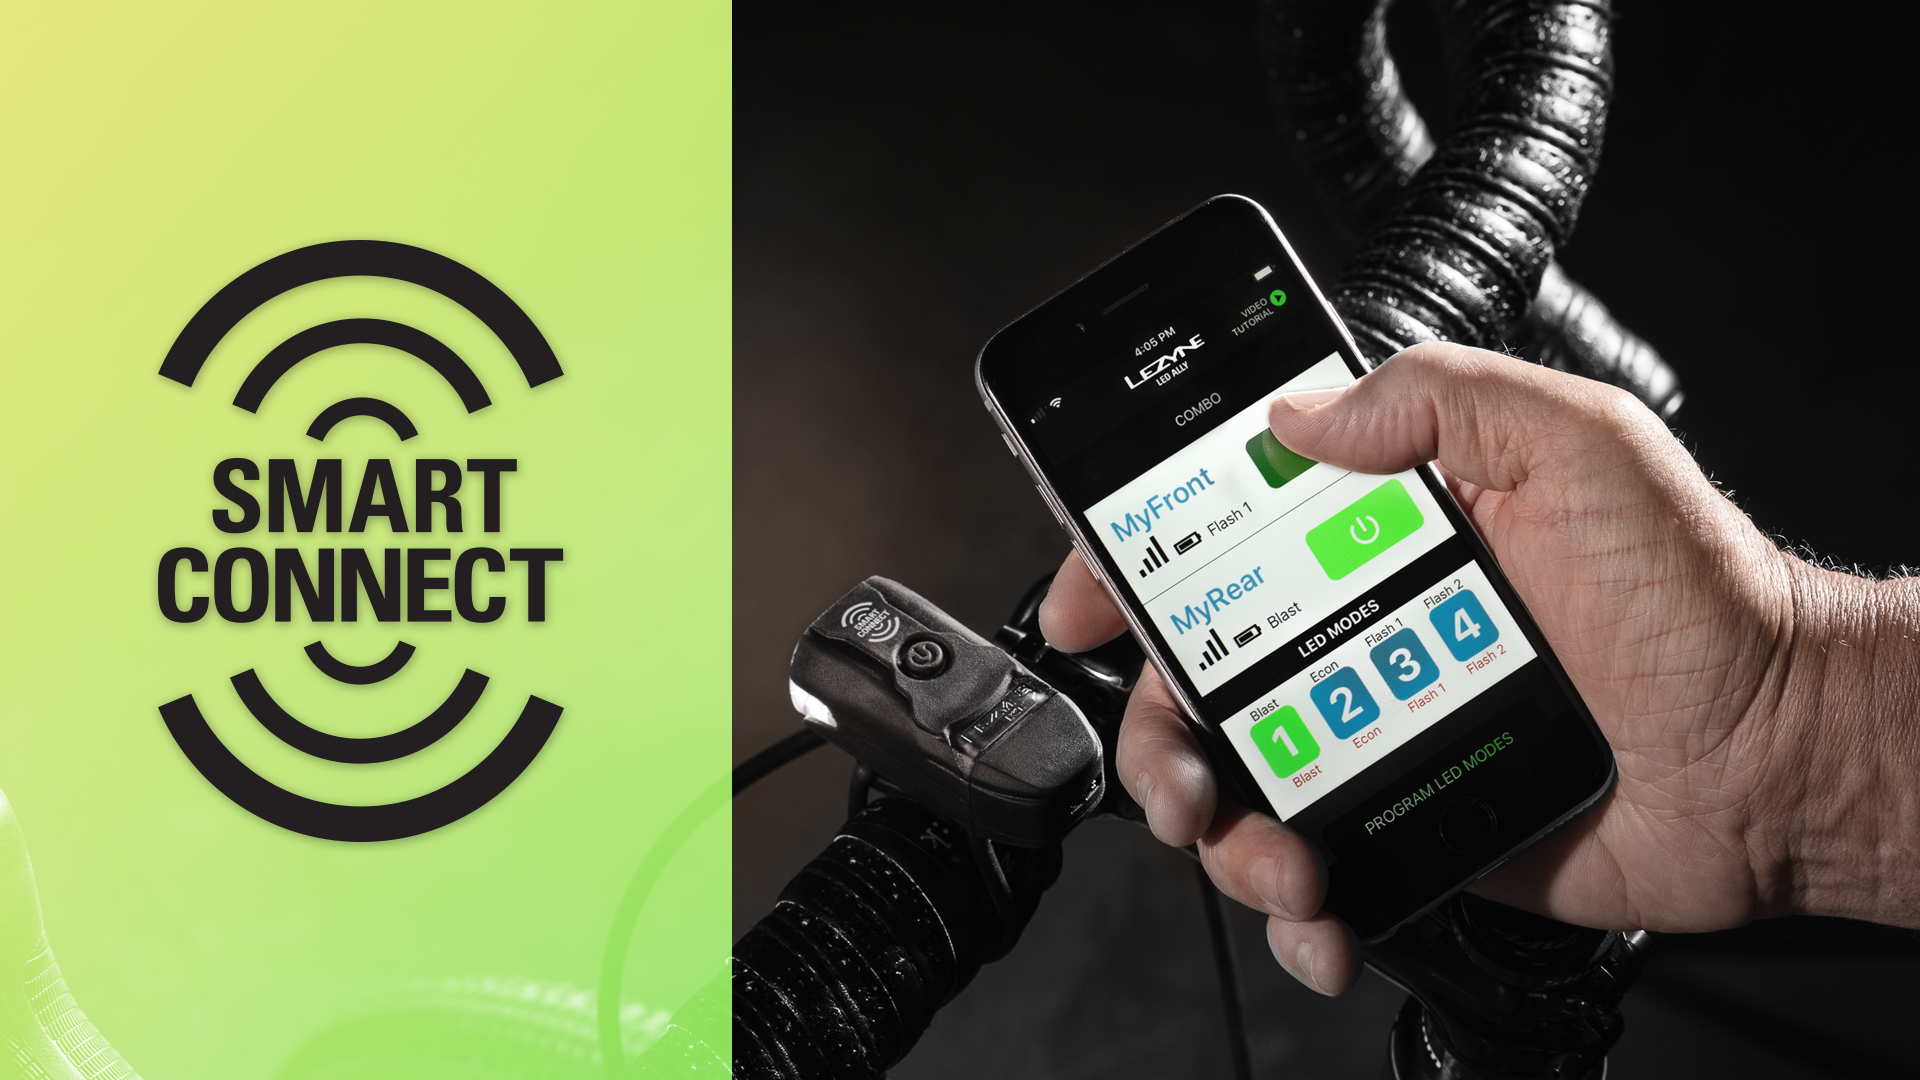 A large Smart Connect logo on the left with a person holding a smart phone in their hand over a bicycle with a light mounted on the handlebars. the phone app shows the smart connect app on the screen with 2 connected lights and 4 light modes. The person is turning off the light with the phone app.